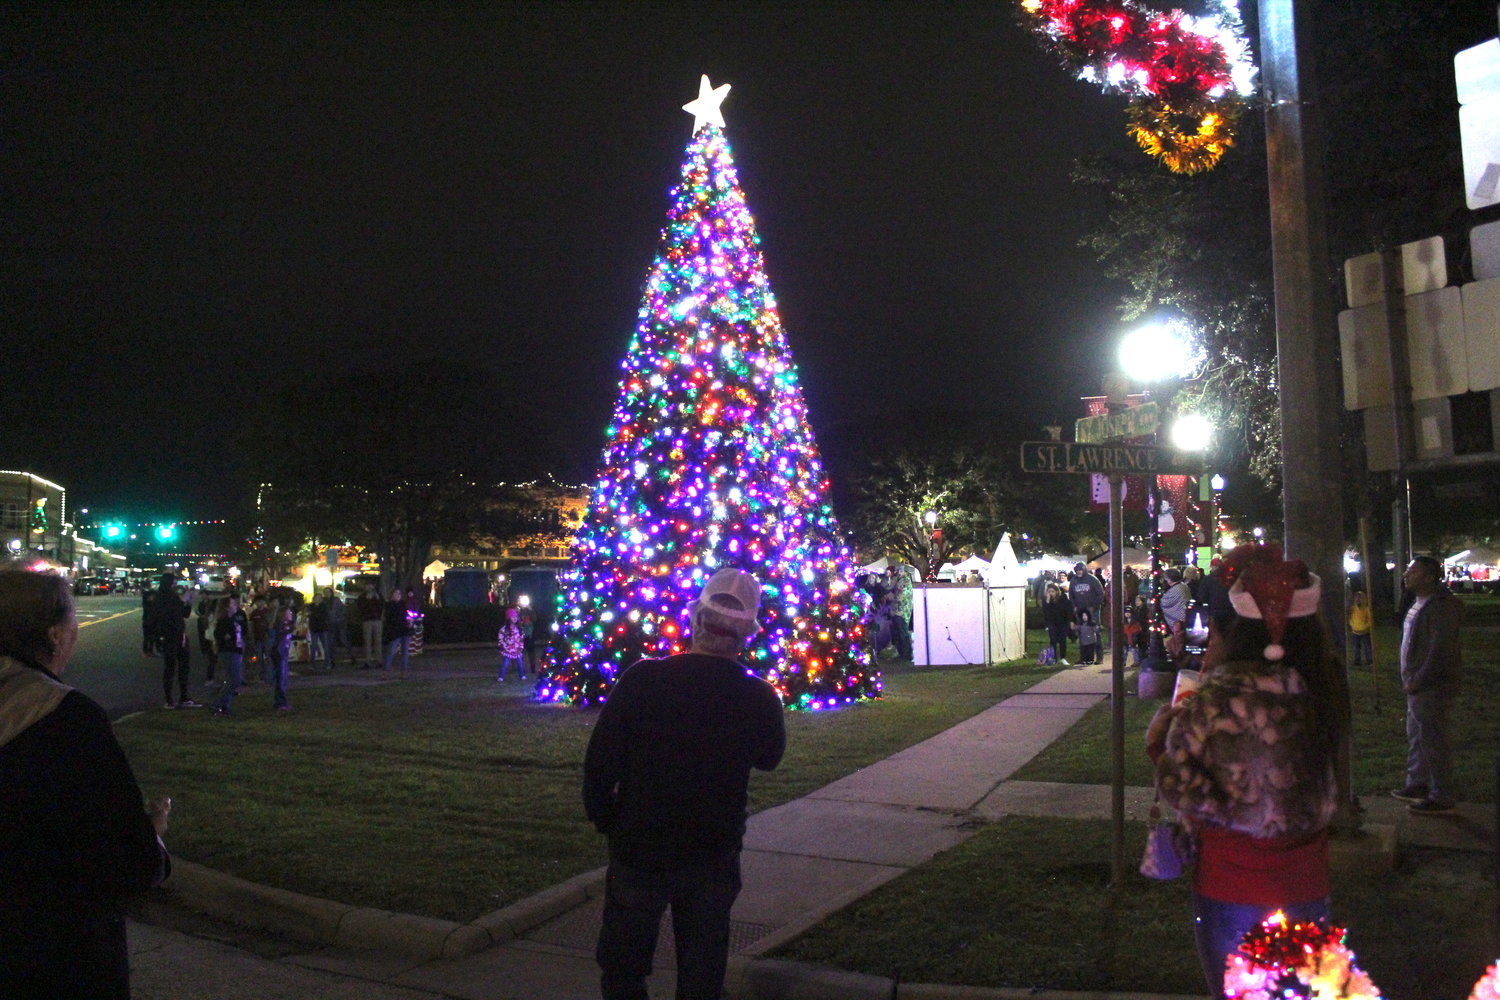 The Gonzales Winterfest Christmas Tree Lighting took place on Saturday, Dec. 3. Travel website travelawaits.com has named Gonzales one of three underrated Christmas and holiday towns in Texas with Winterfest and Pioneer Village among the activities cited as reasons to come to the community.